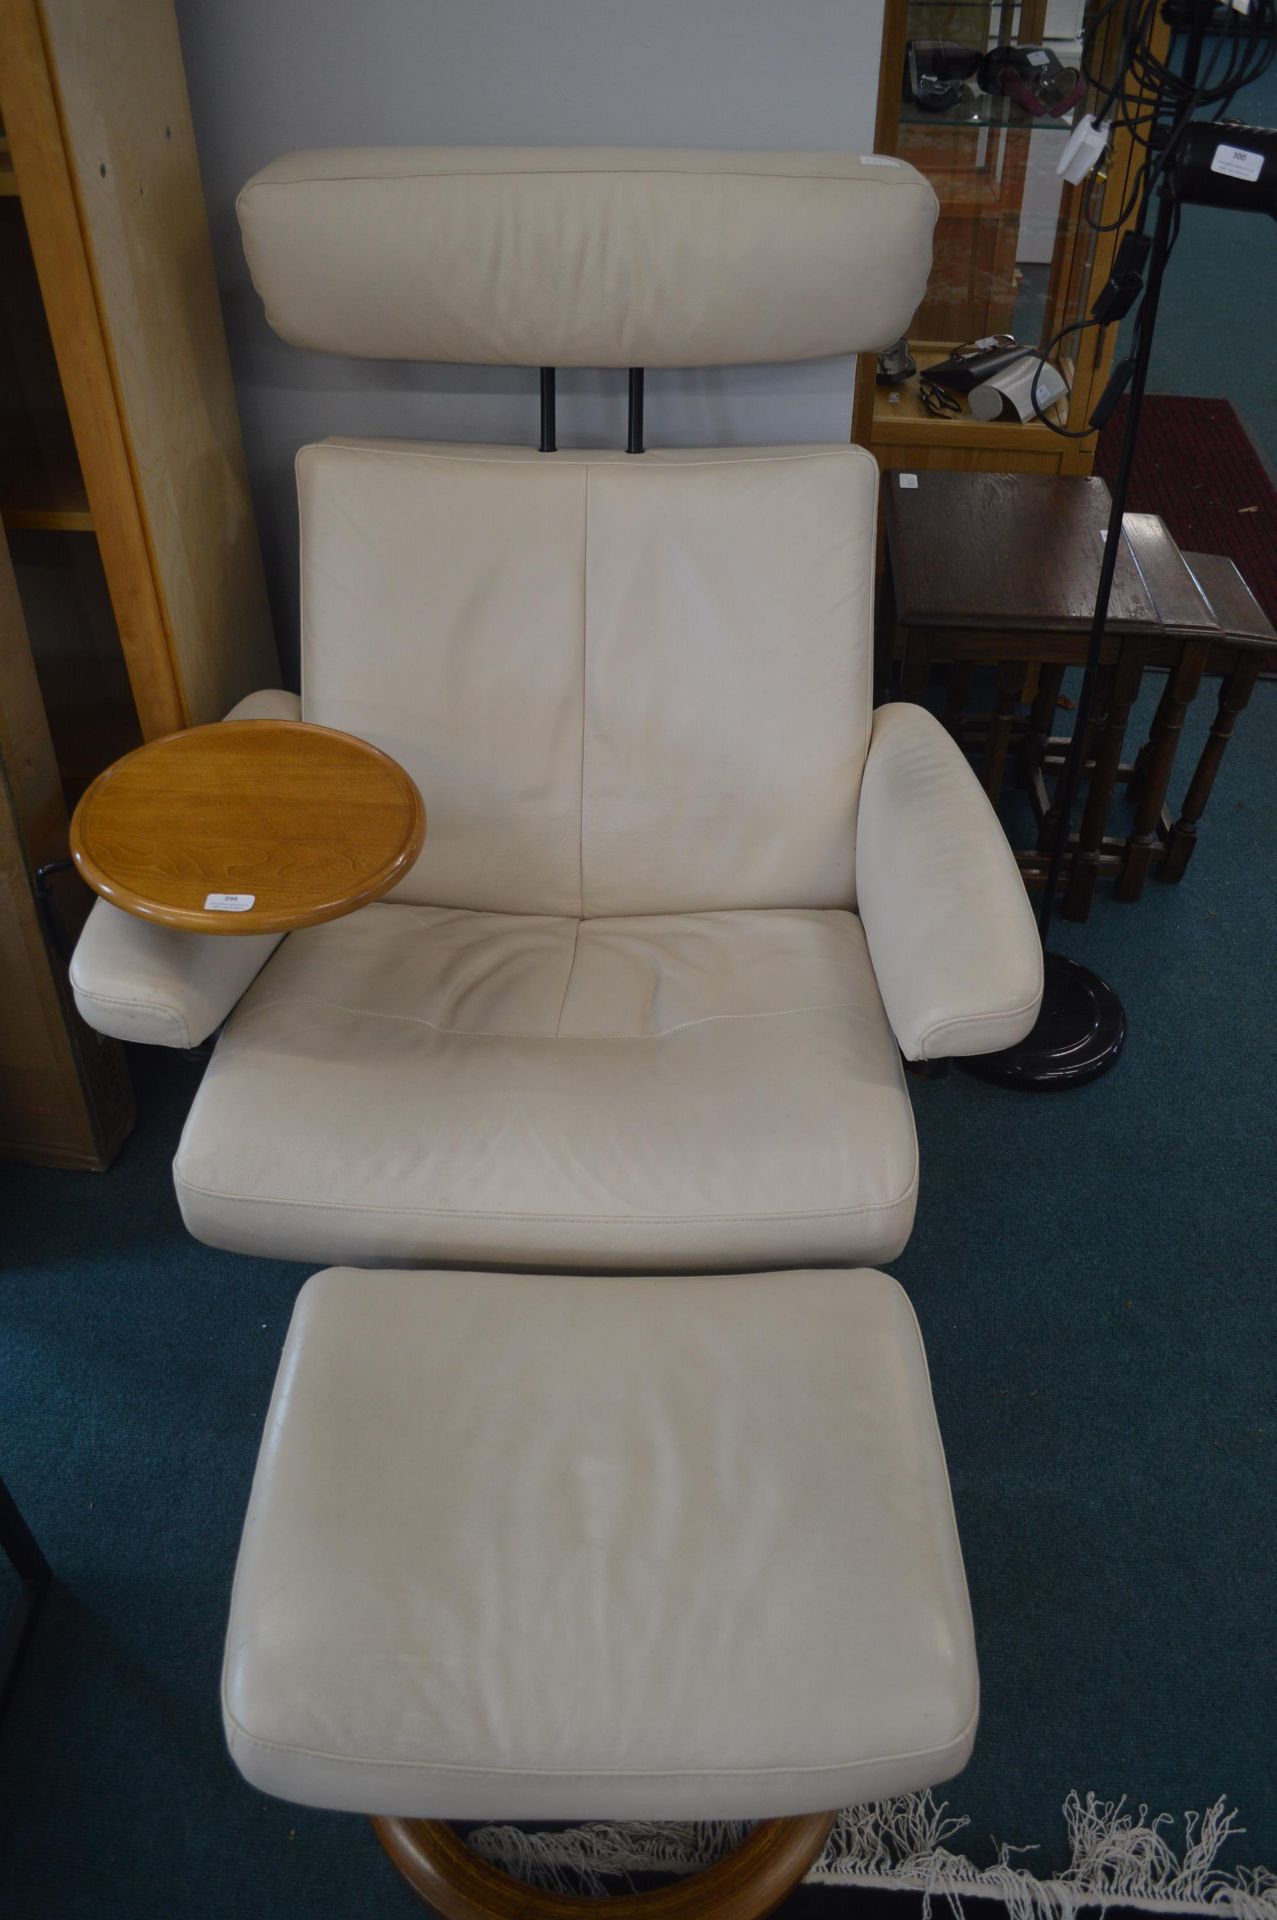 Stressless Cream Leather Swivel Armchair with Matc - Image 2 of 2